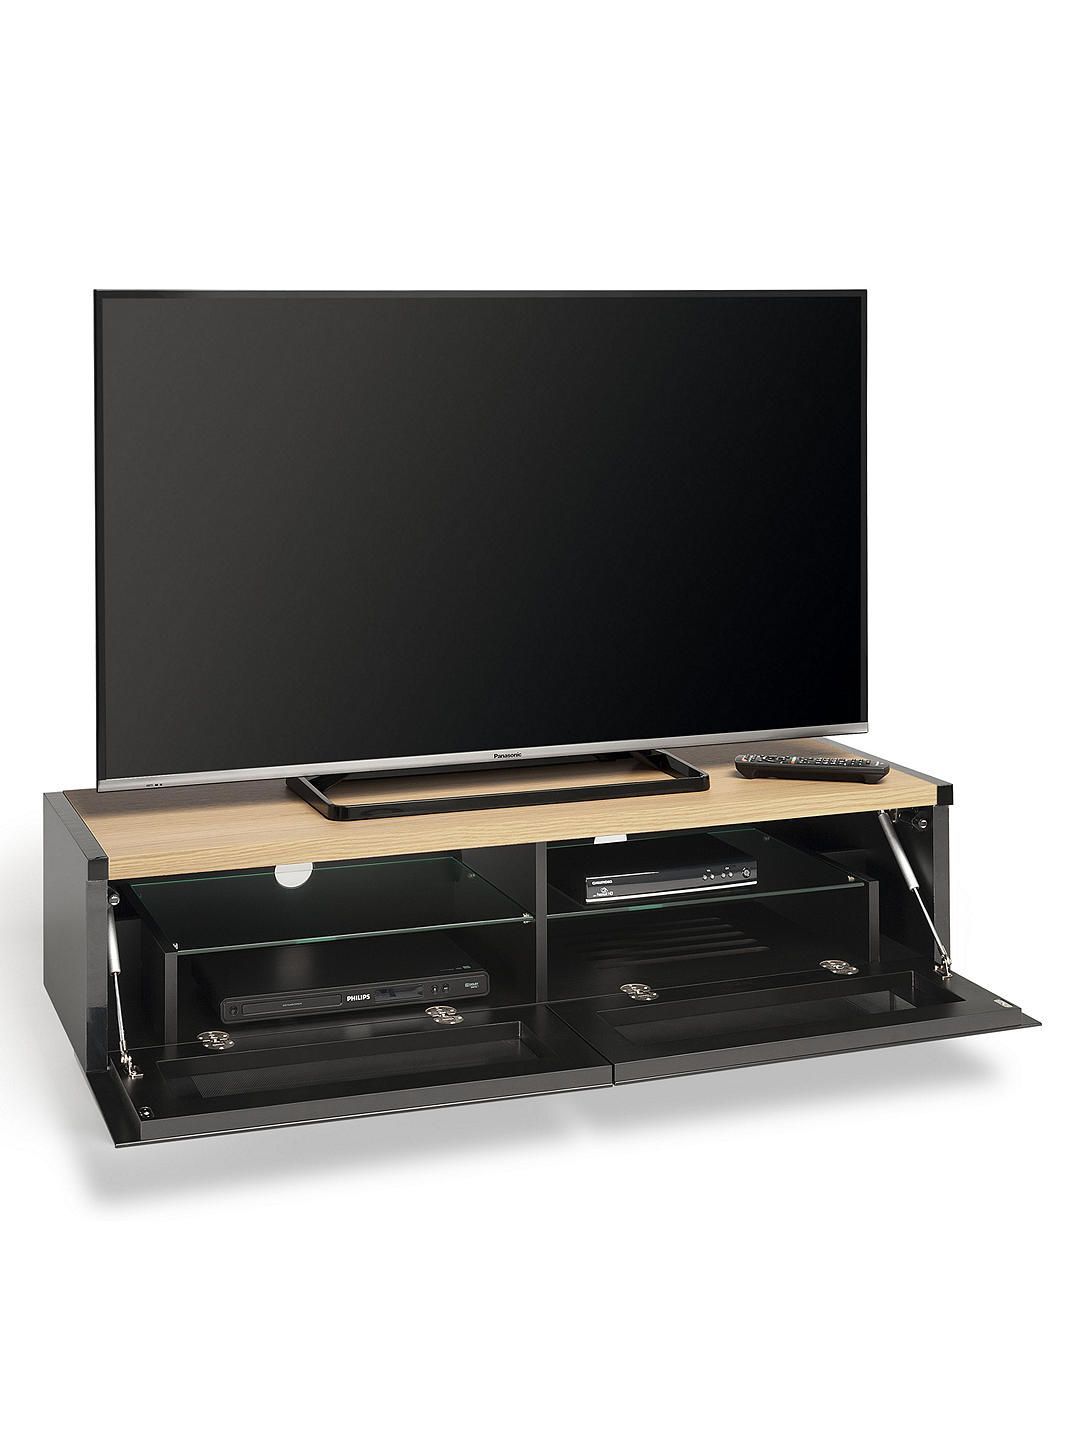 Techlink Panorama Pm120 Tv Stand For Tvs Up To 60 | Tv Intended For Techlink Pm160w Panorama Tv Stand (View 4 of 15)